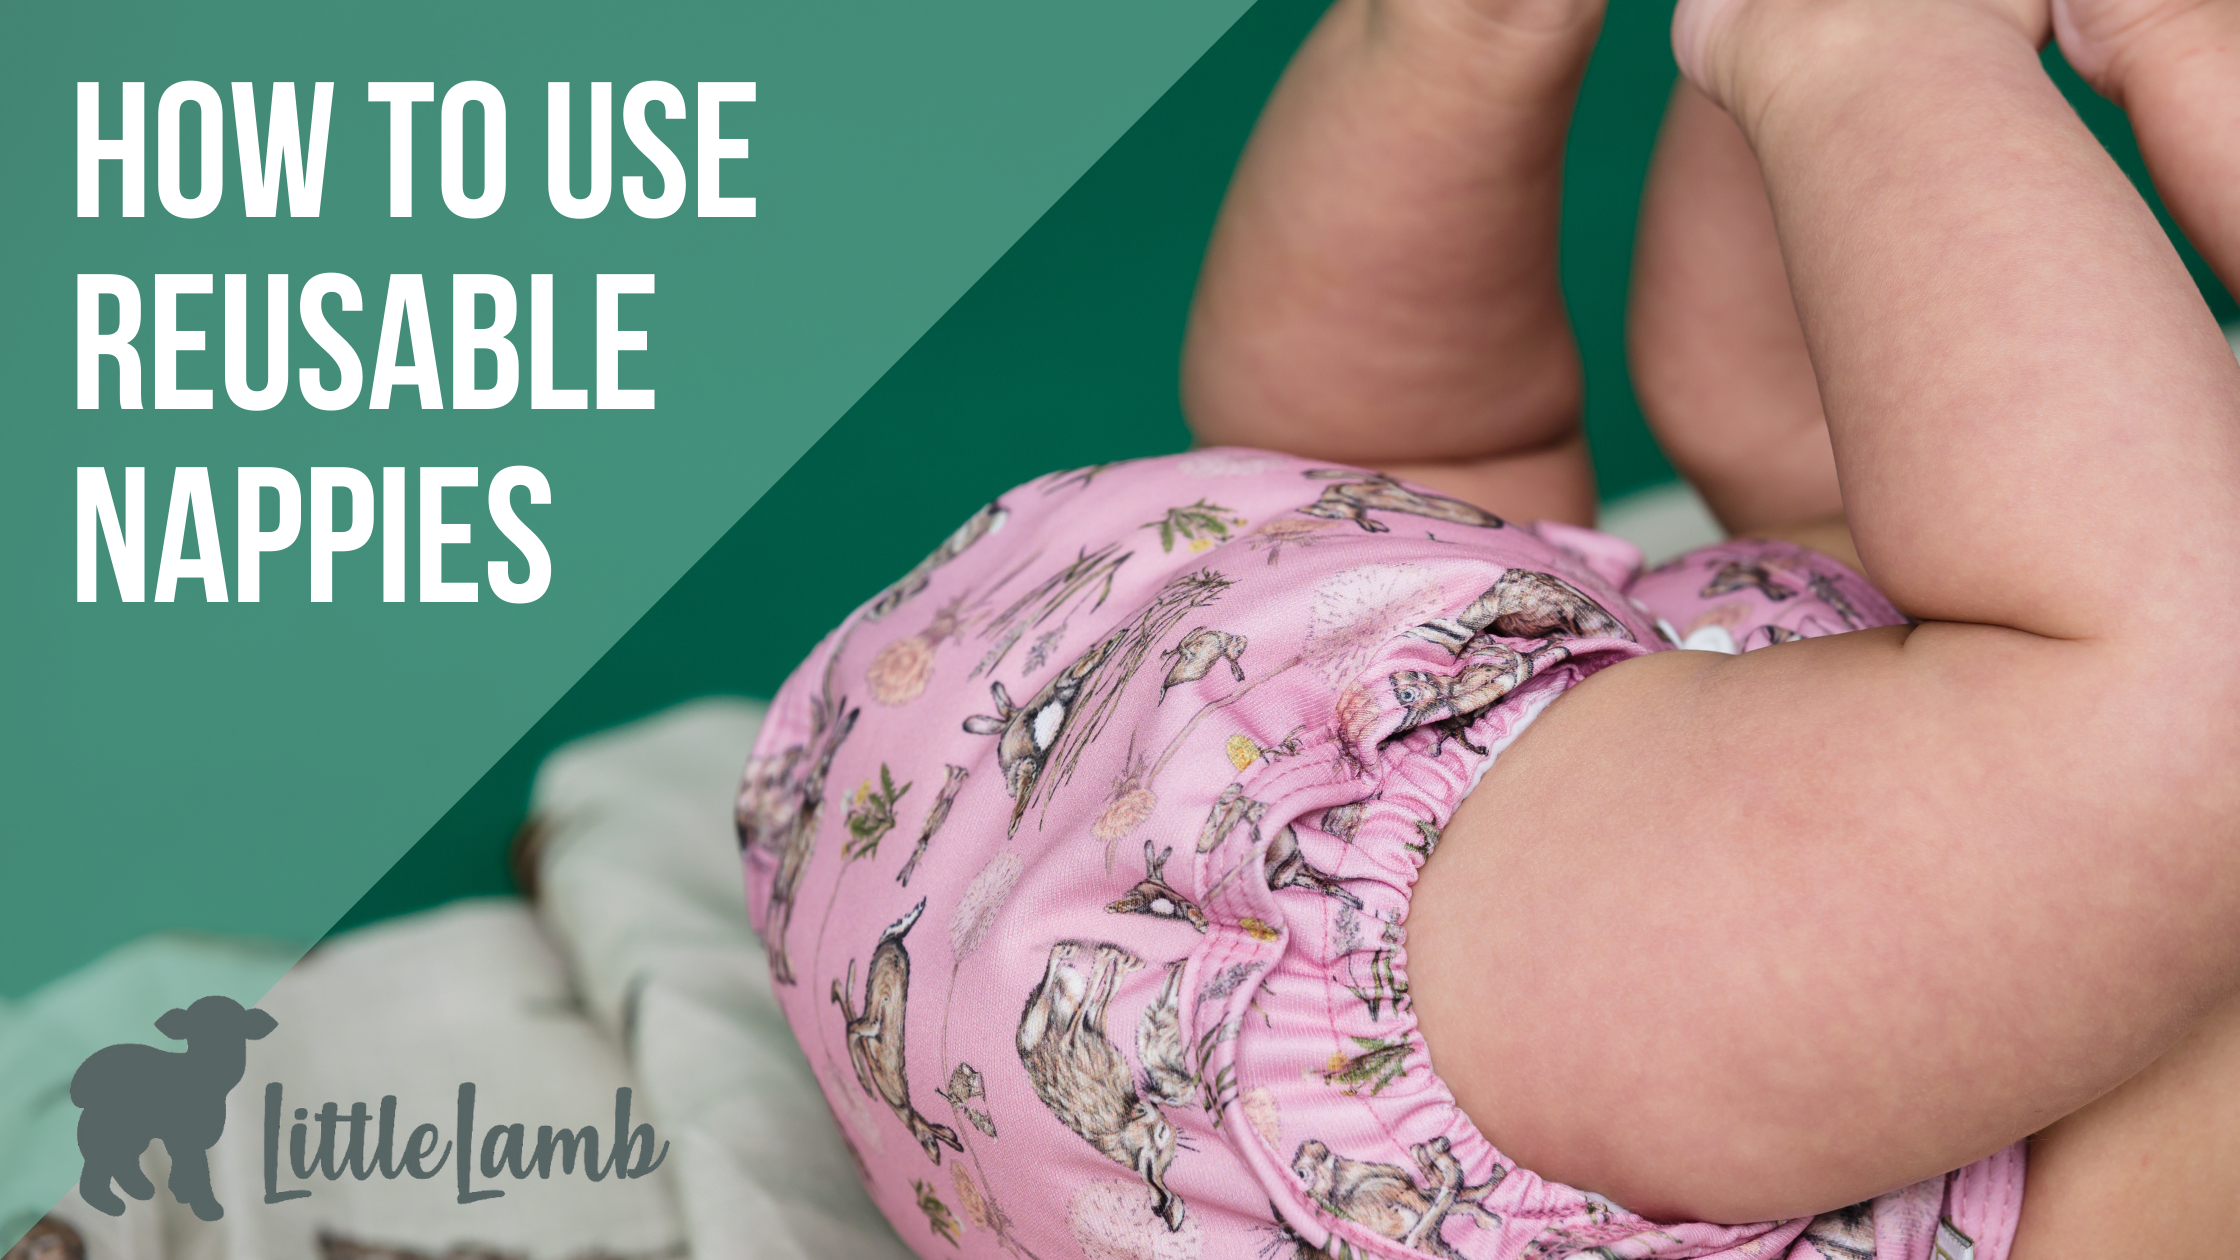 How to Use Reusable Nappies